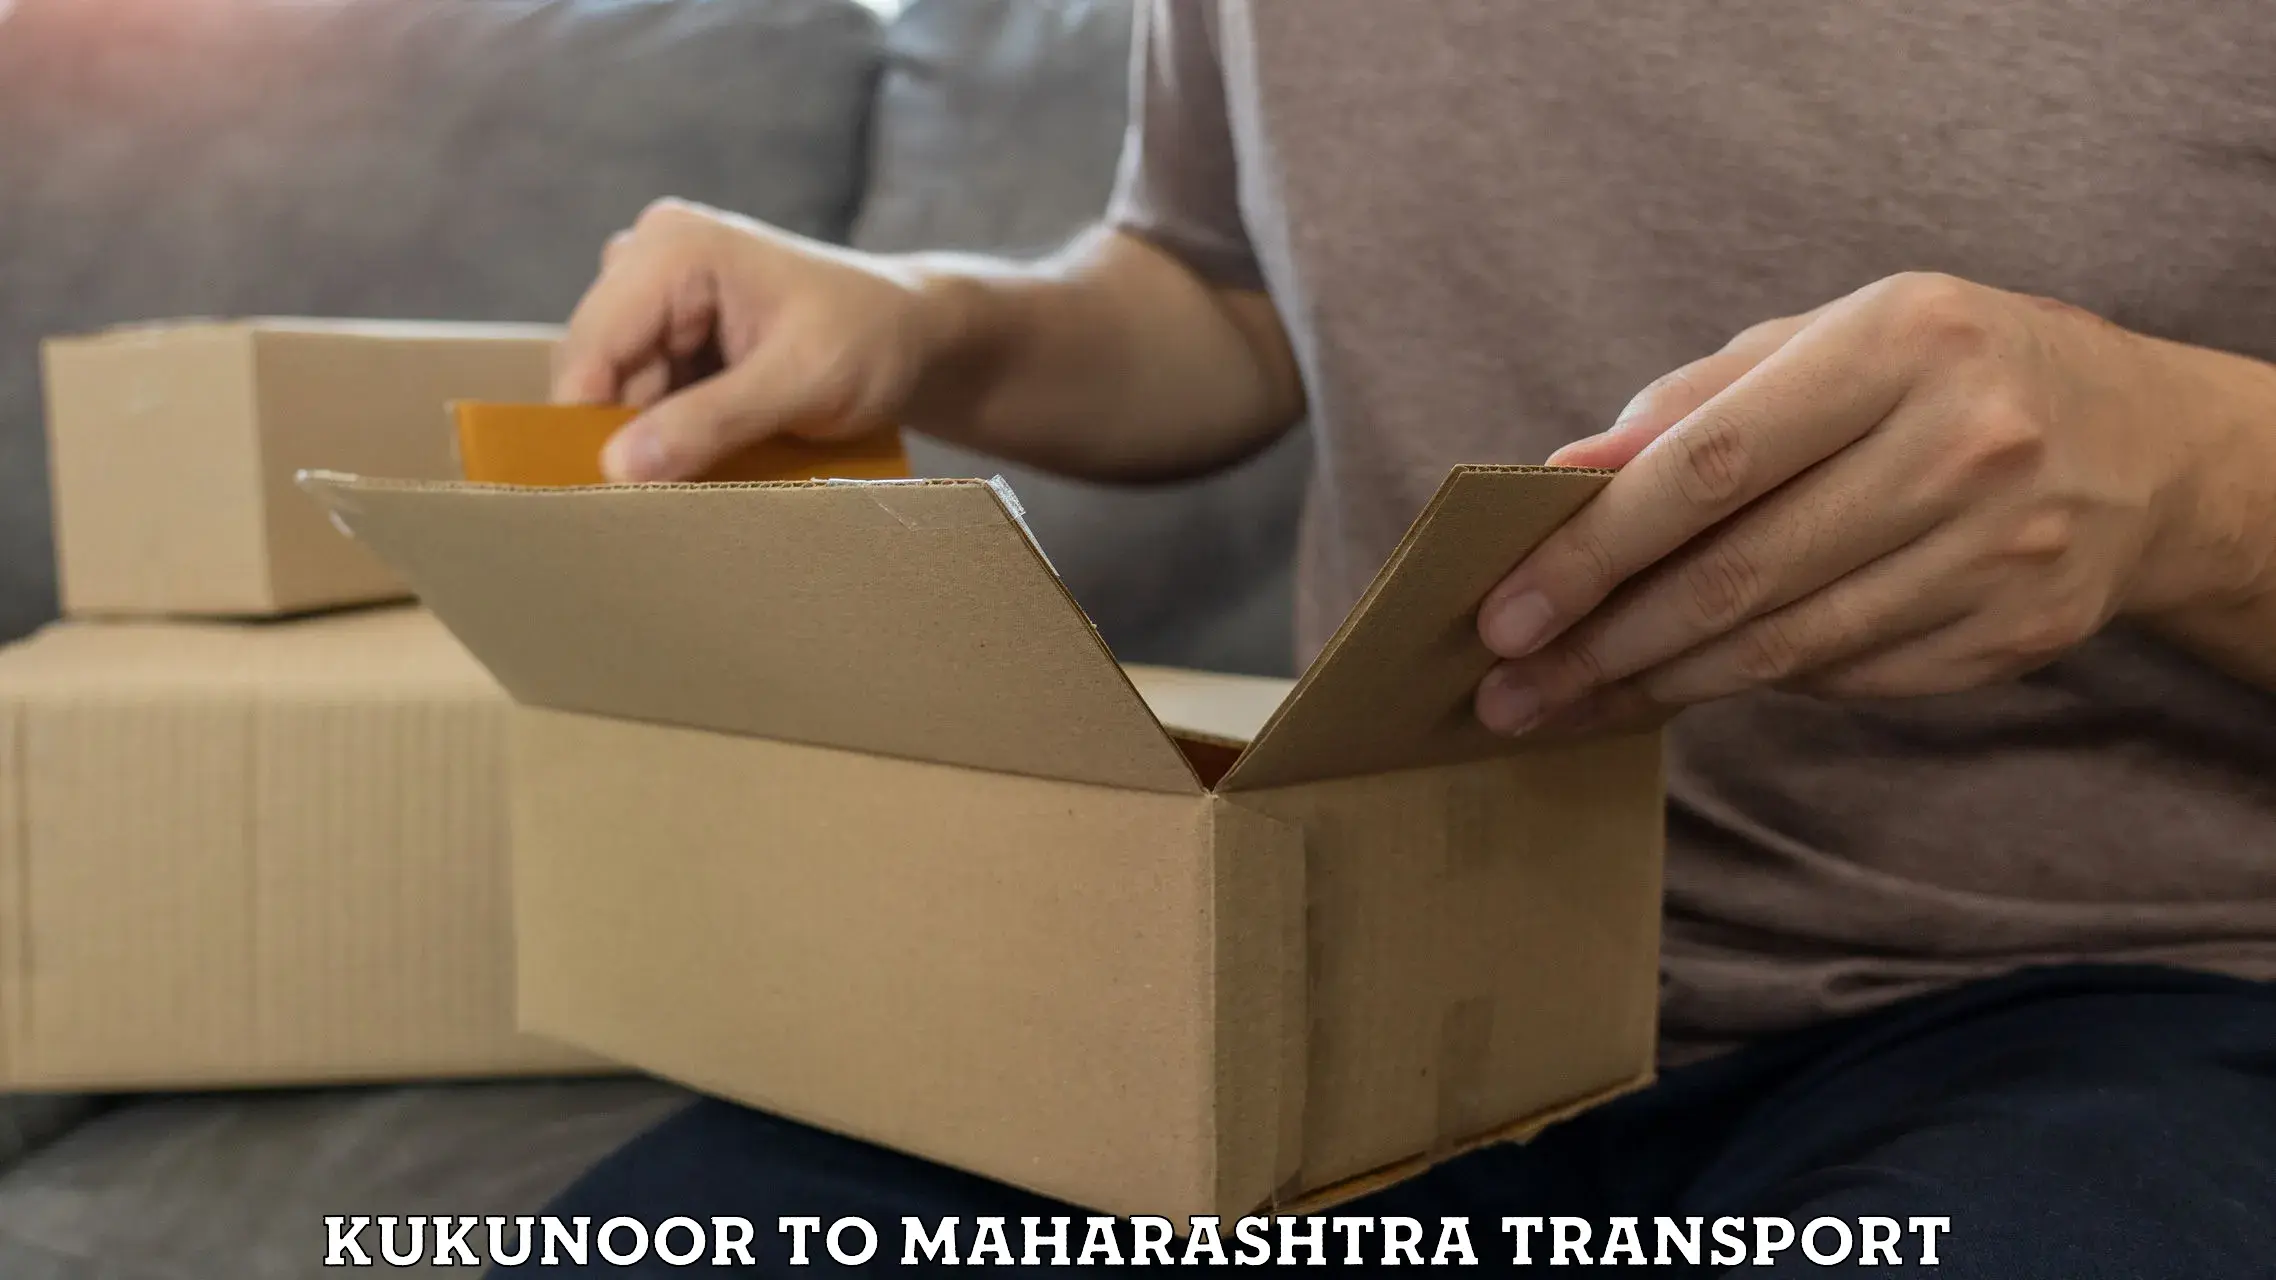 Commercial transport service Kukunoor to Dhule